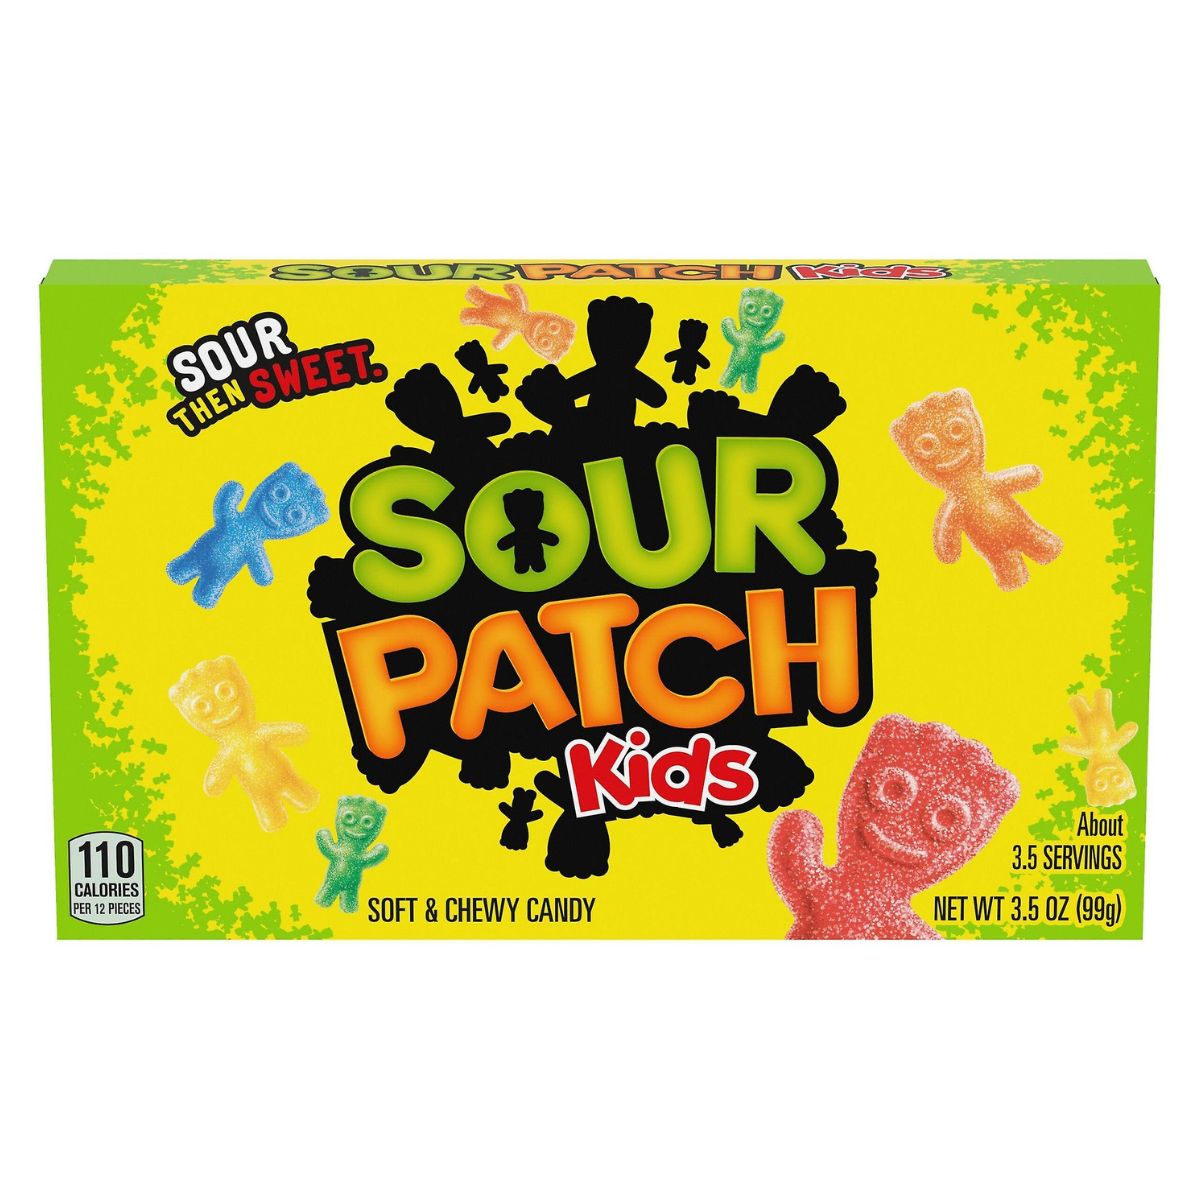 A box of Sour Patch - Soft and Chewy Candy - 99g candy.